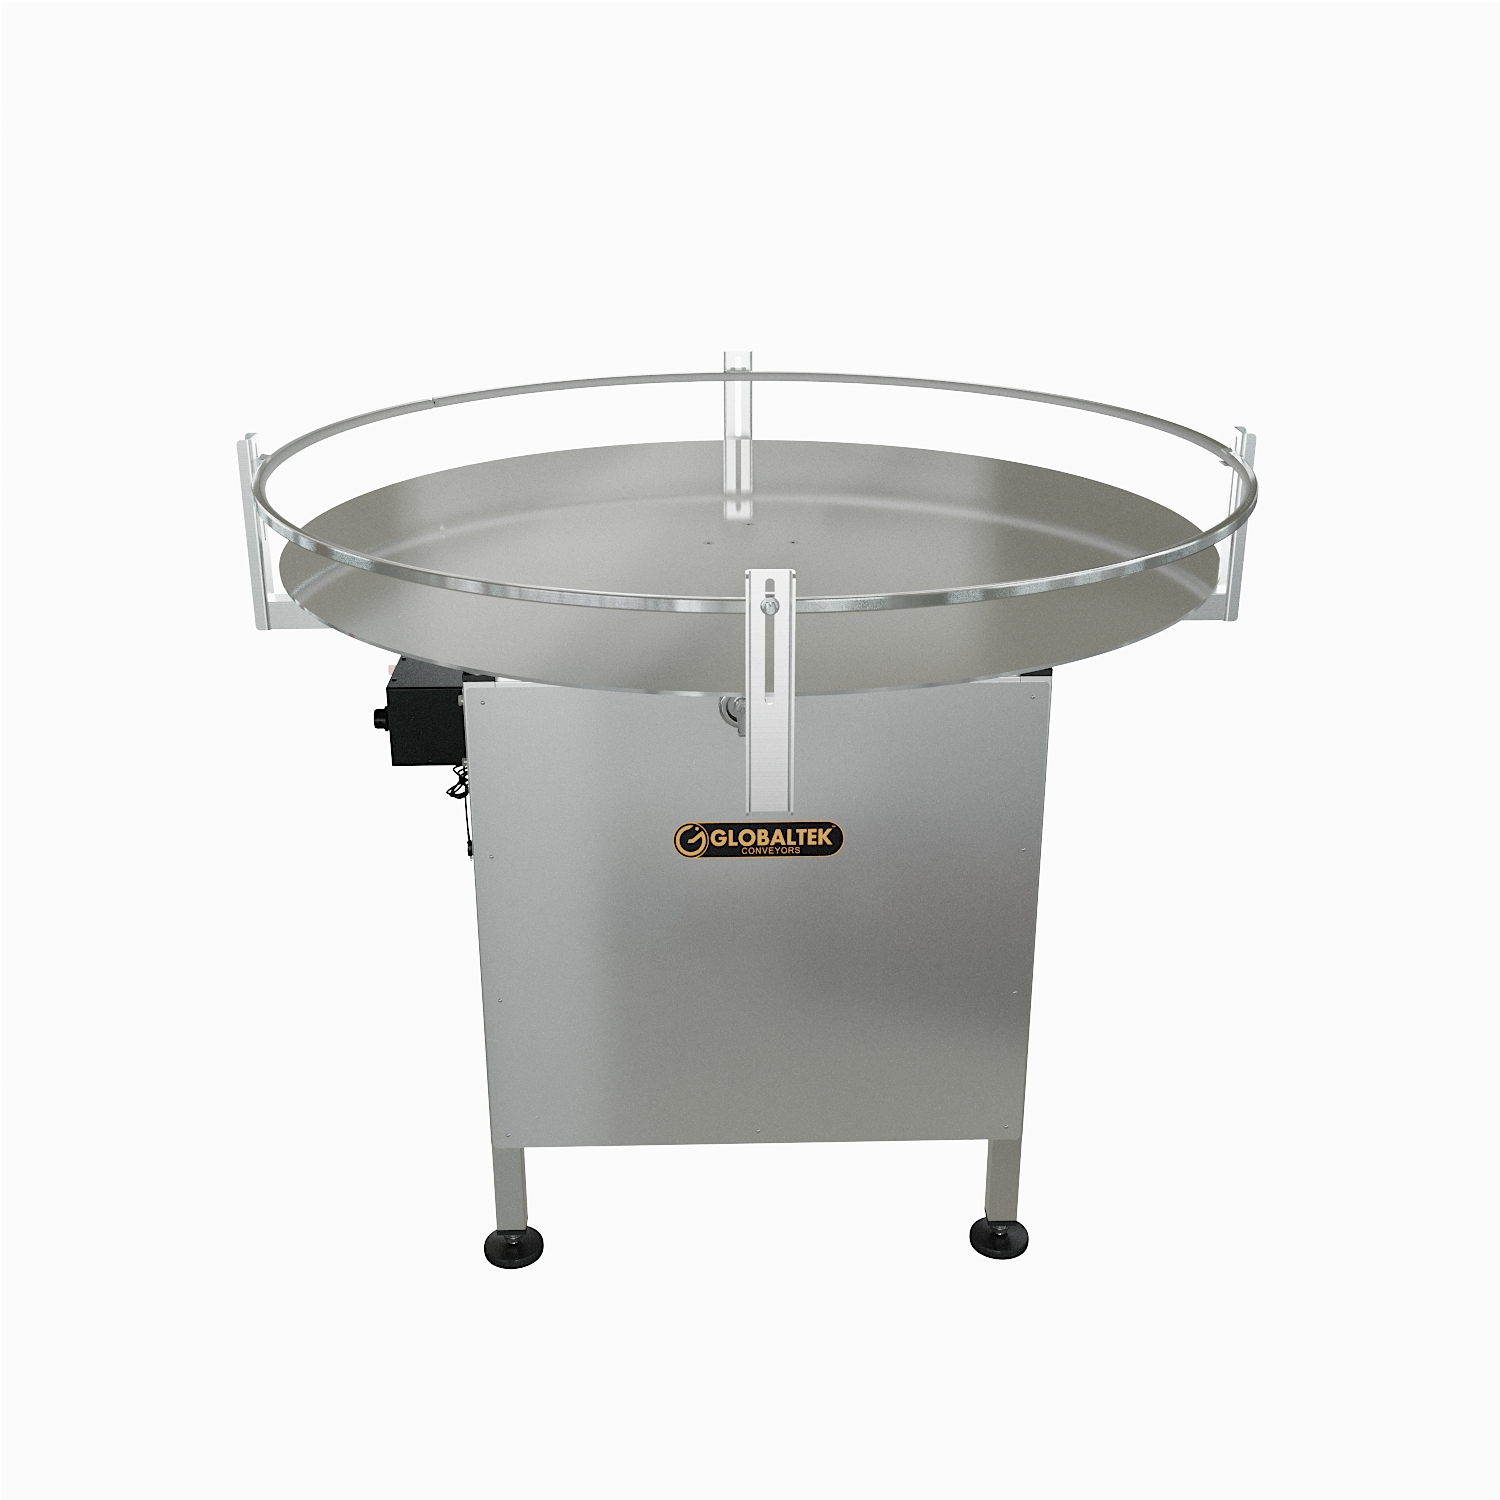 Stainless Steel Enclosed Frame Accumulating Rotary Table GLOBALTEK 36 Dia 